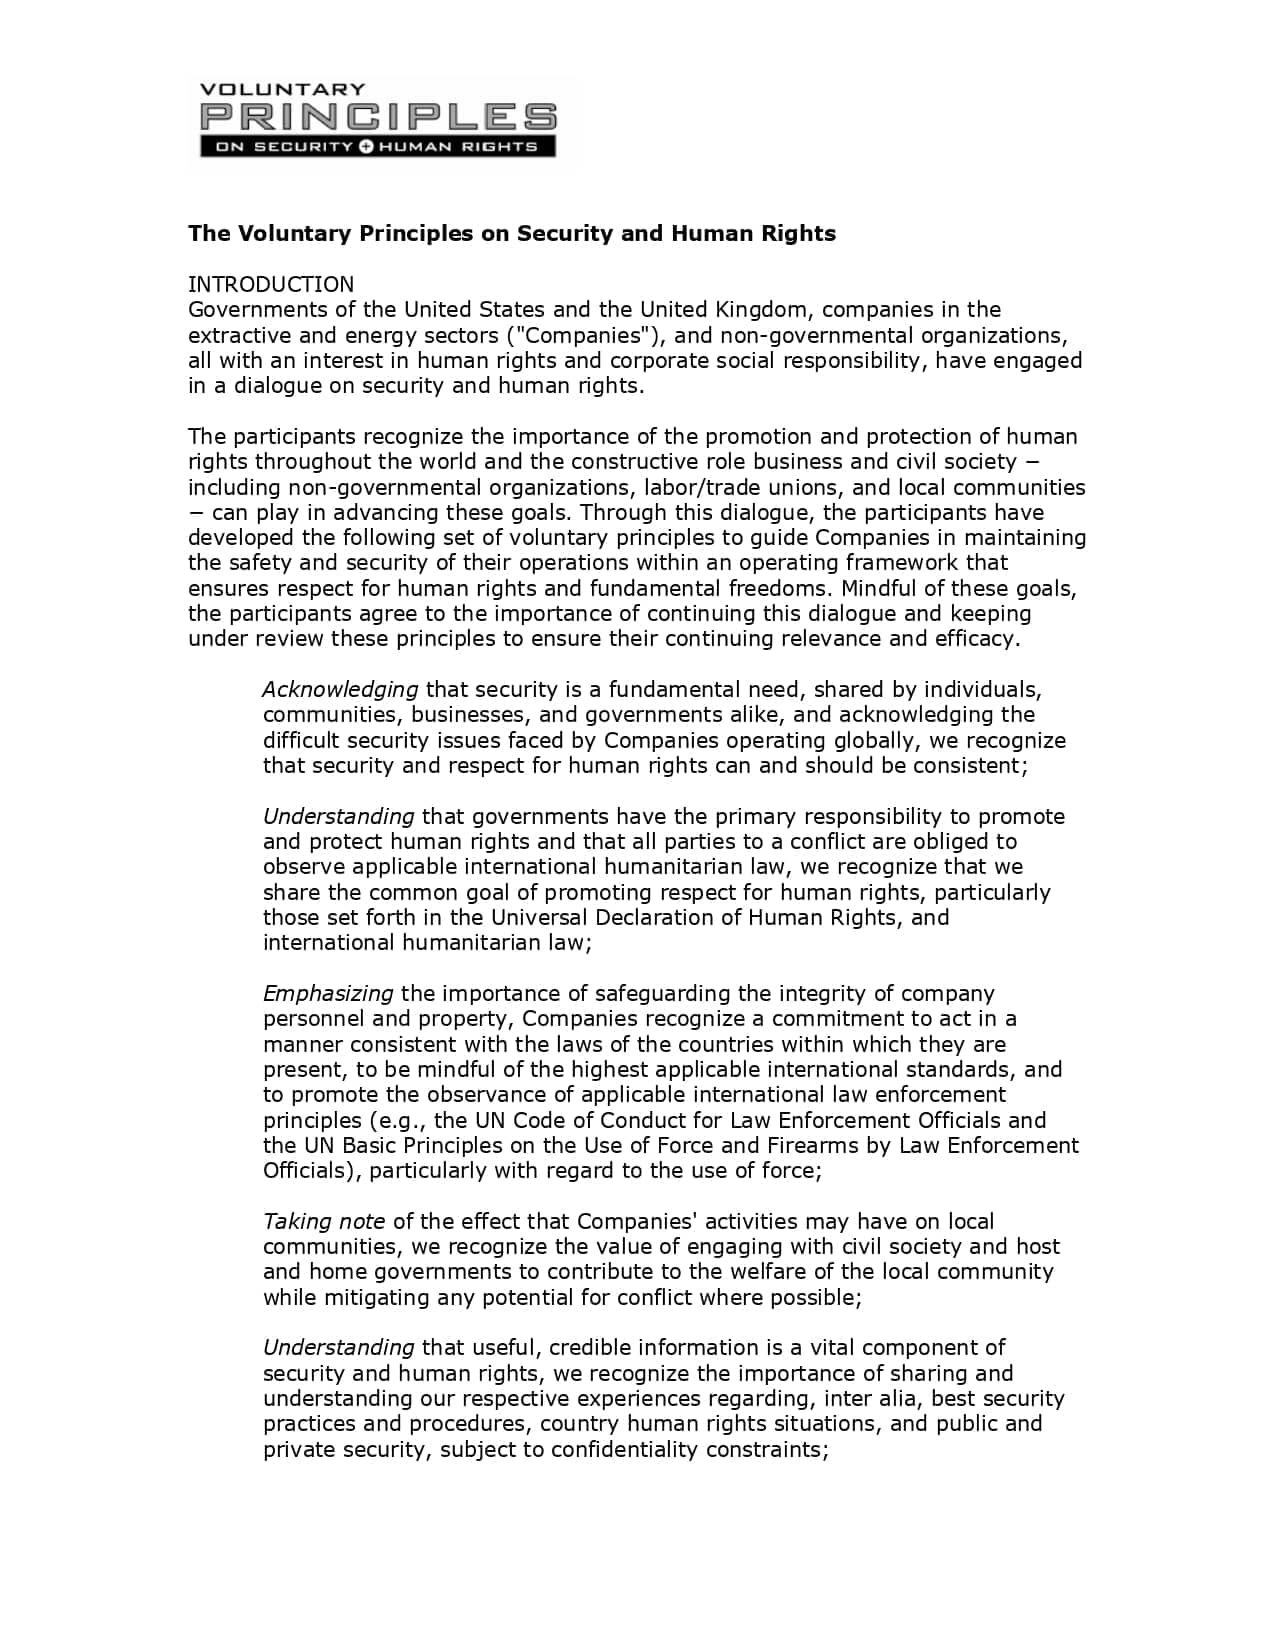 Voluntary Principles on Security and Human Rights (VPs)